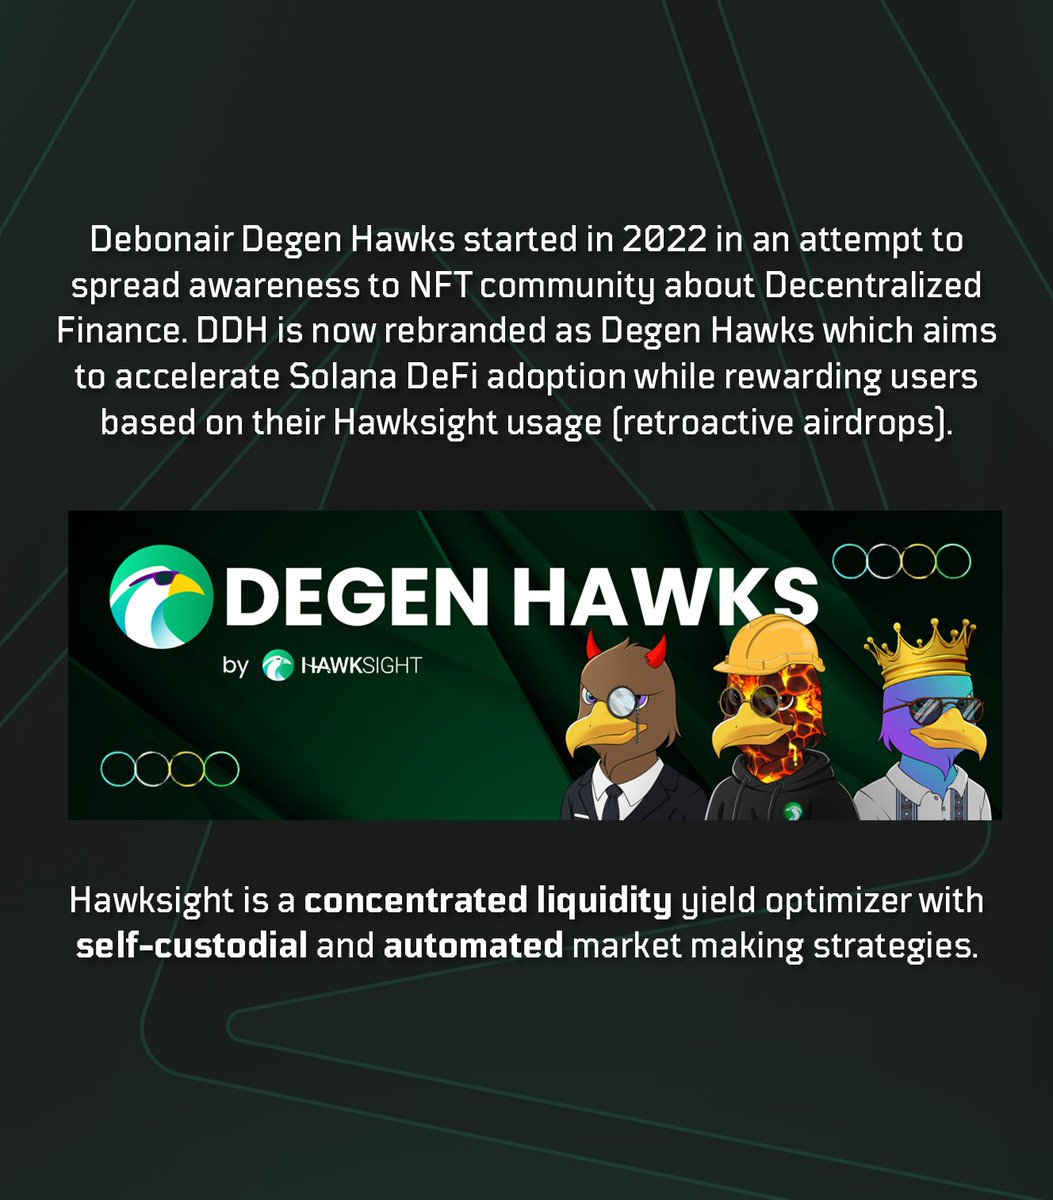 REdao welcomes @HawksightCo to the NFT Olympics

✅ Accelerate DeFi usage
✅ Optimize yield with self-custodial and automated strategies

Vote for Degen Hawks by Hawksight and help them secure a bag of $RE